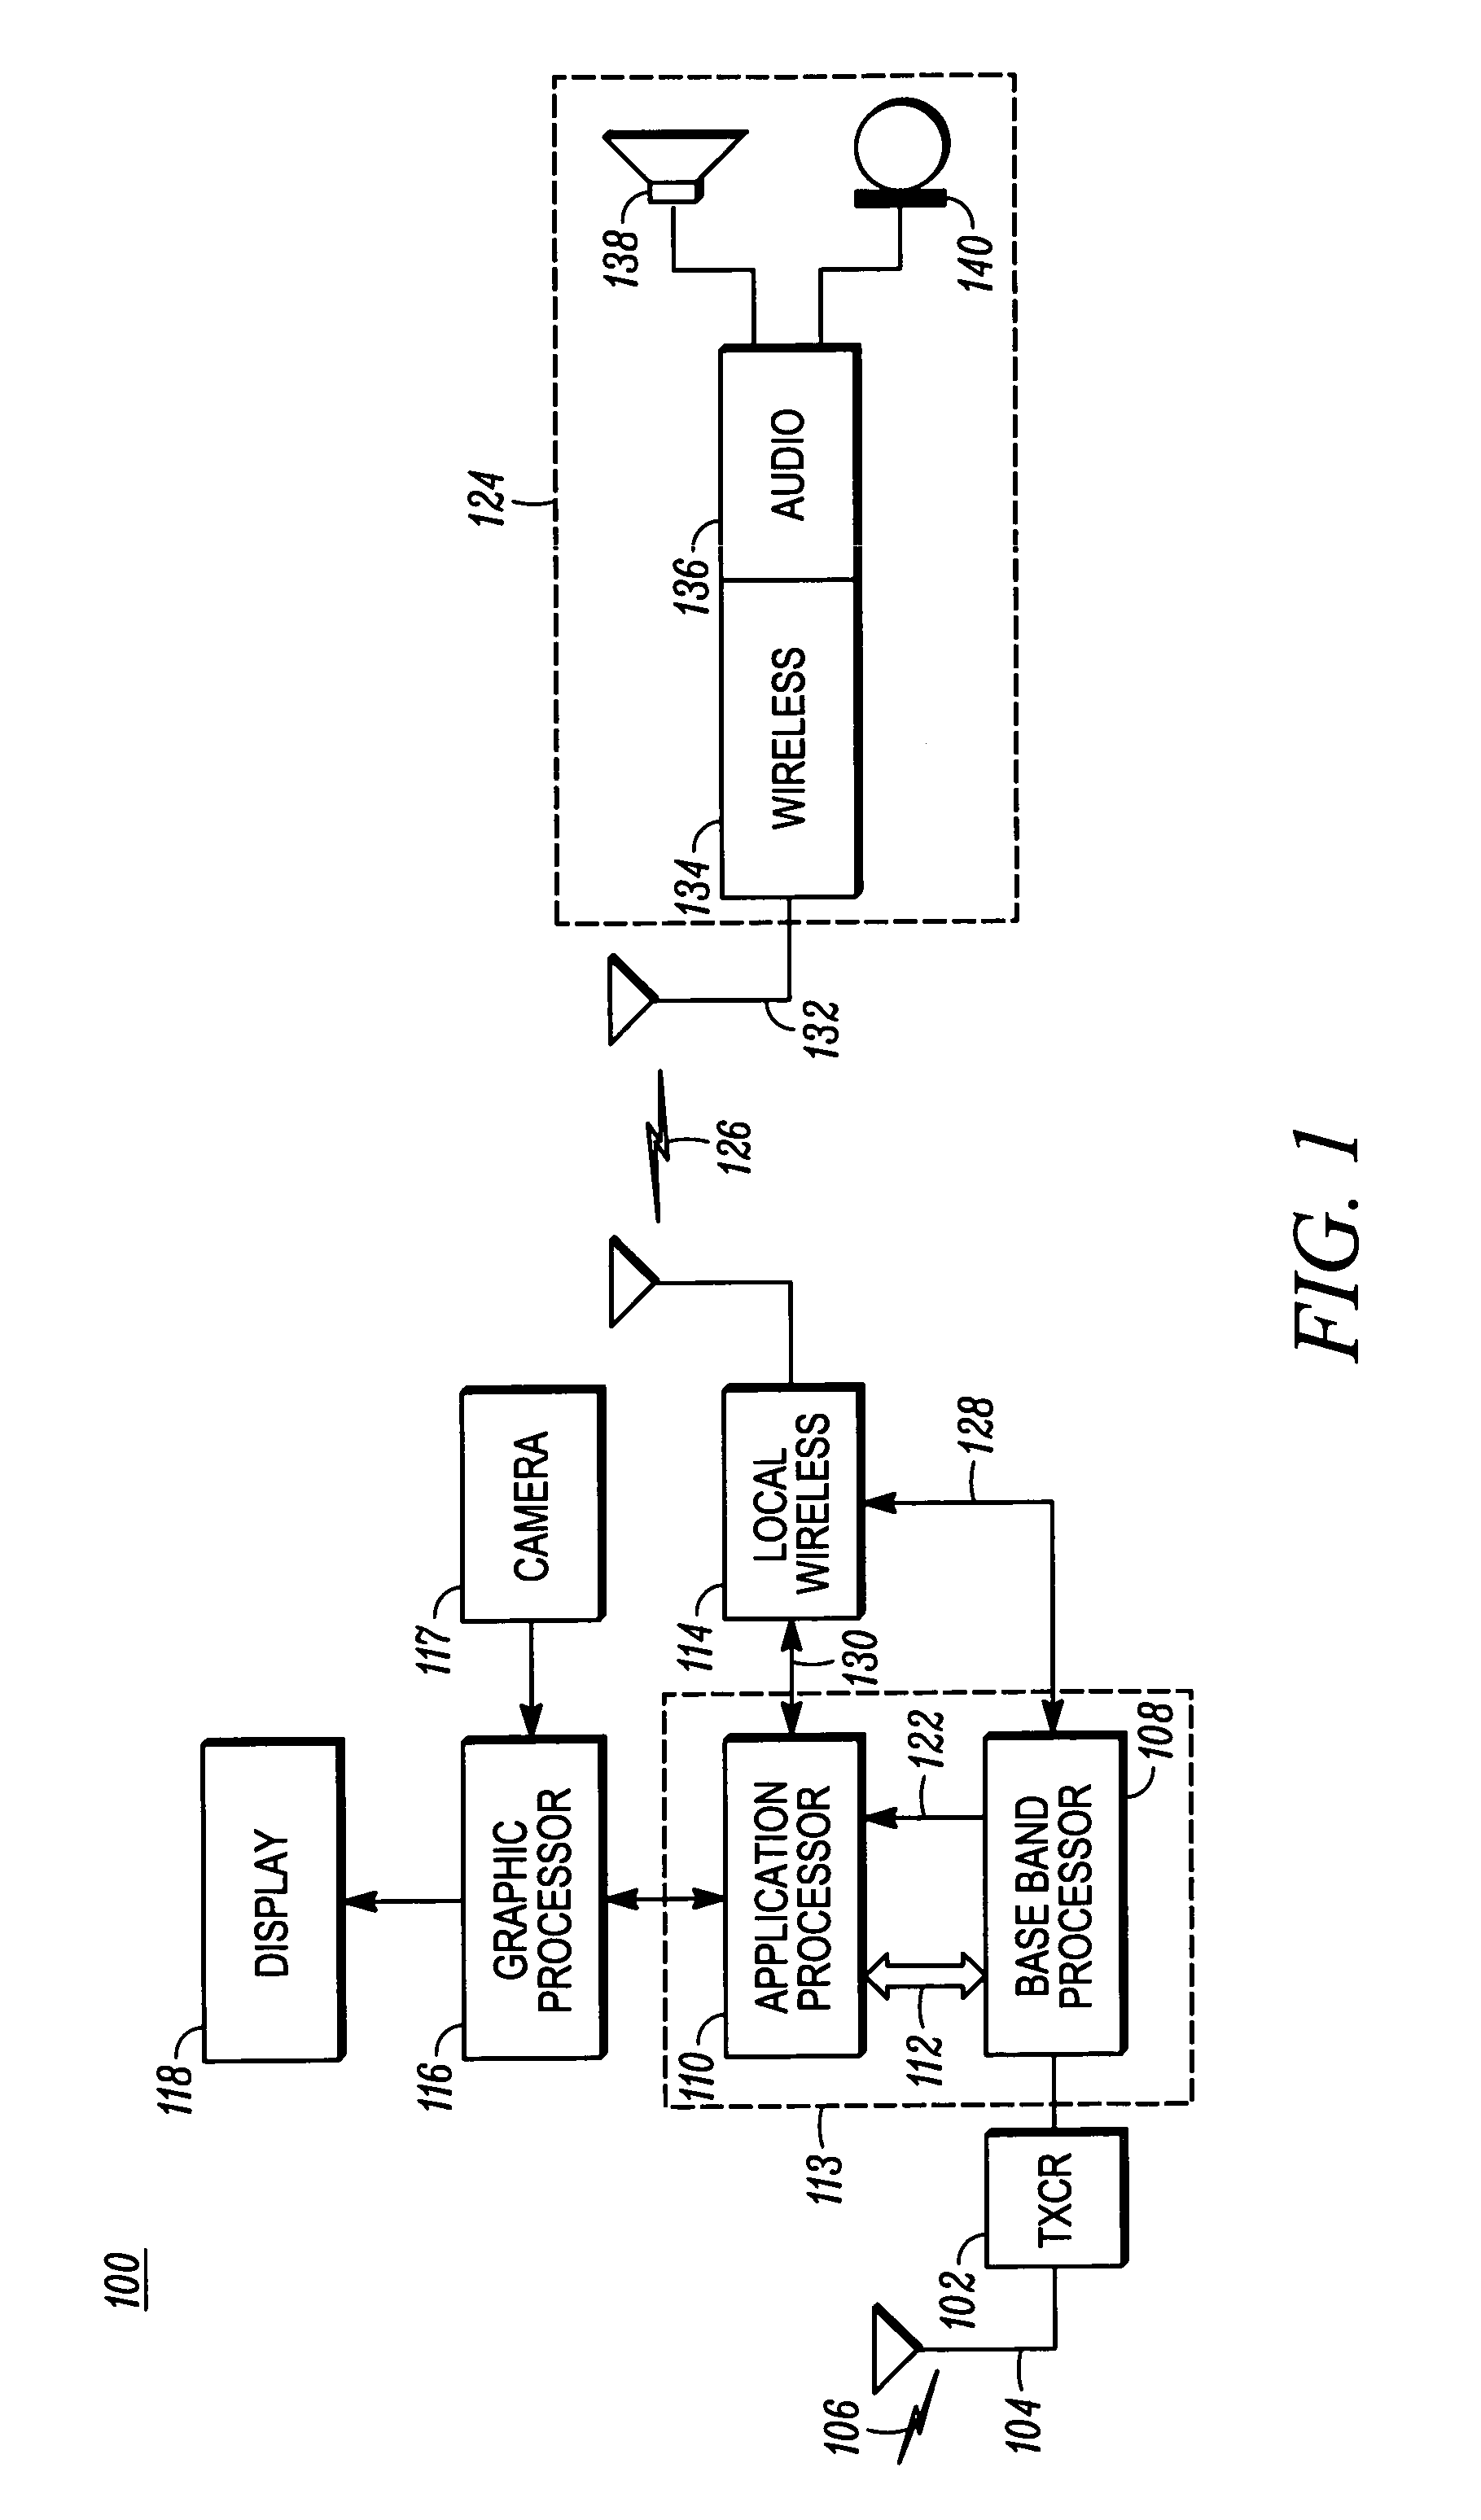 Method and apparatus for establishing an audio link to a wireless earpiece in reduced time